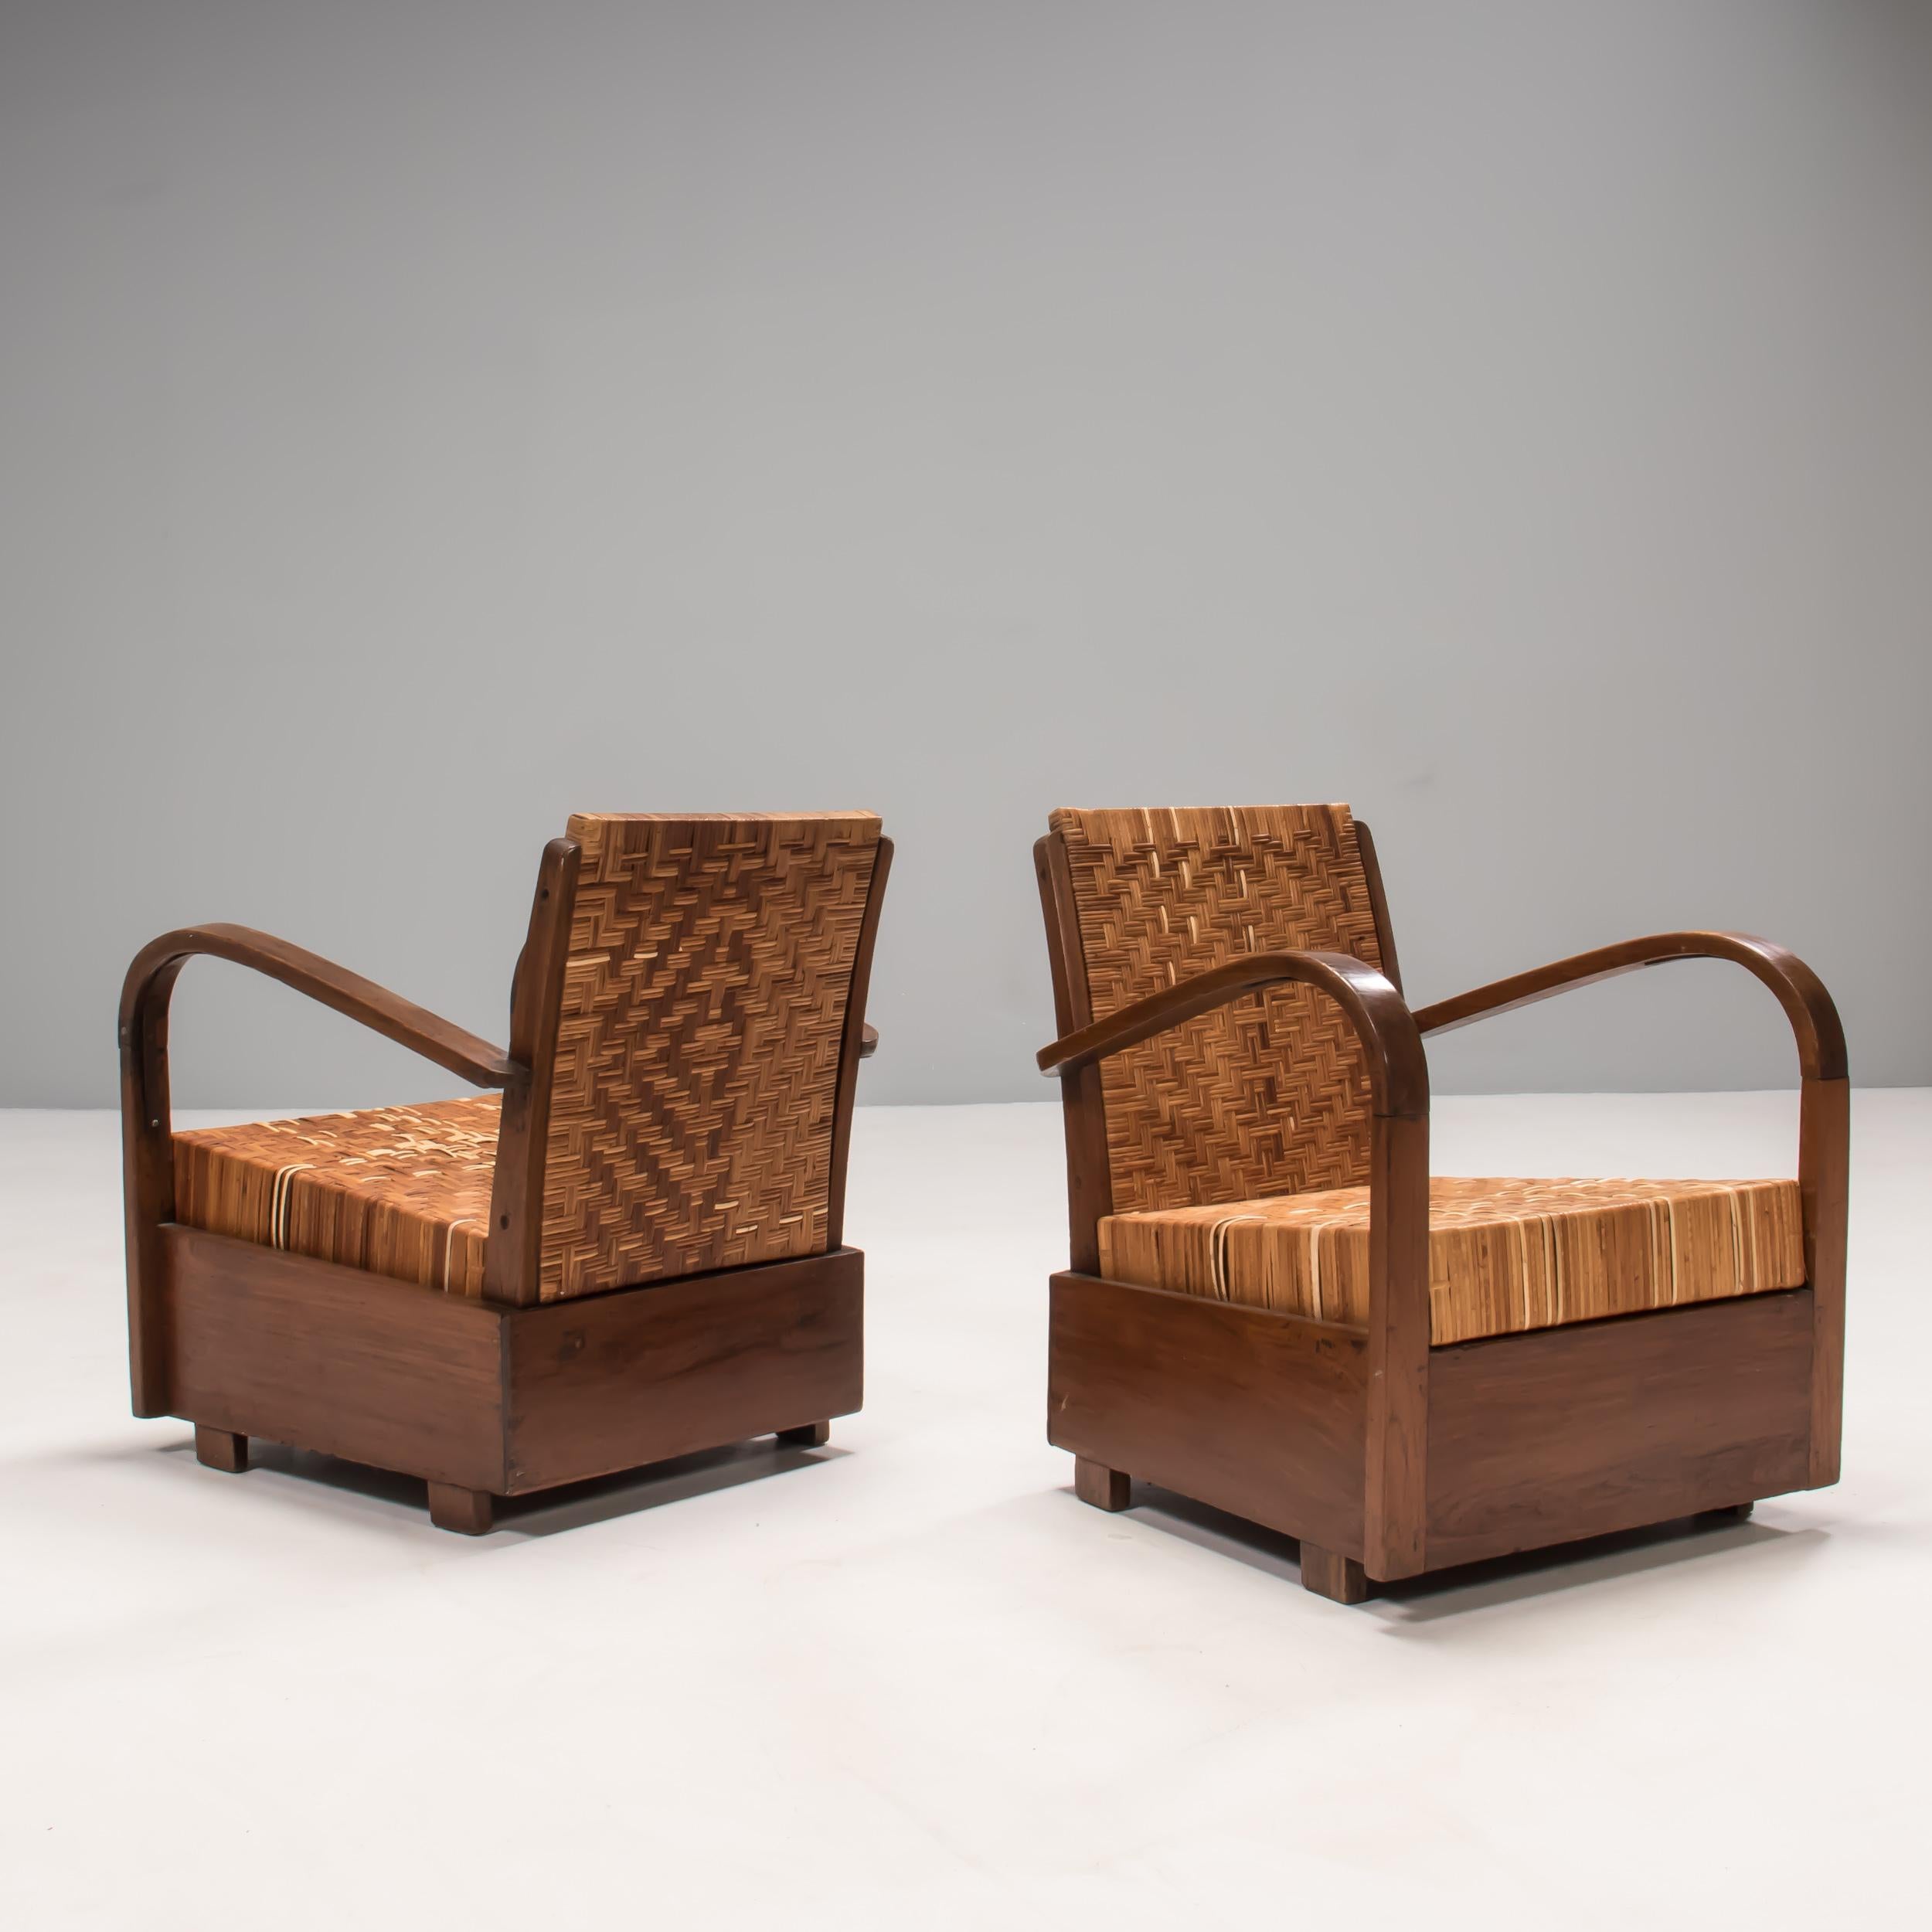 American Colonial 1920s Art Deco Teak & Cane Armchairs, Set of 2